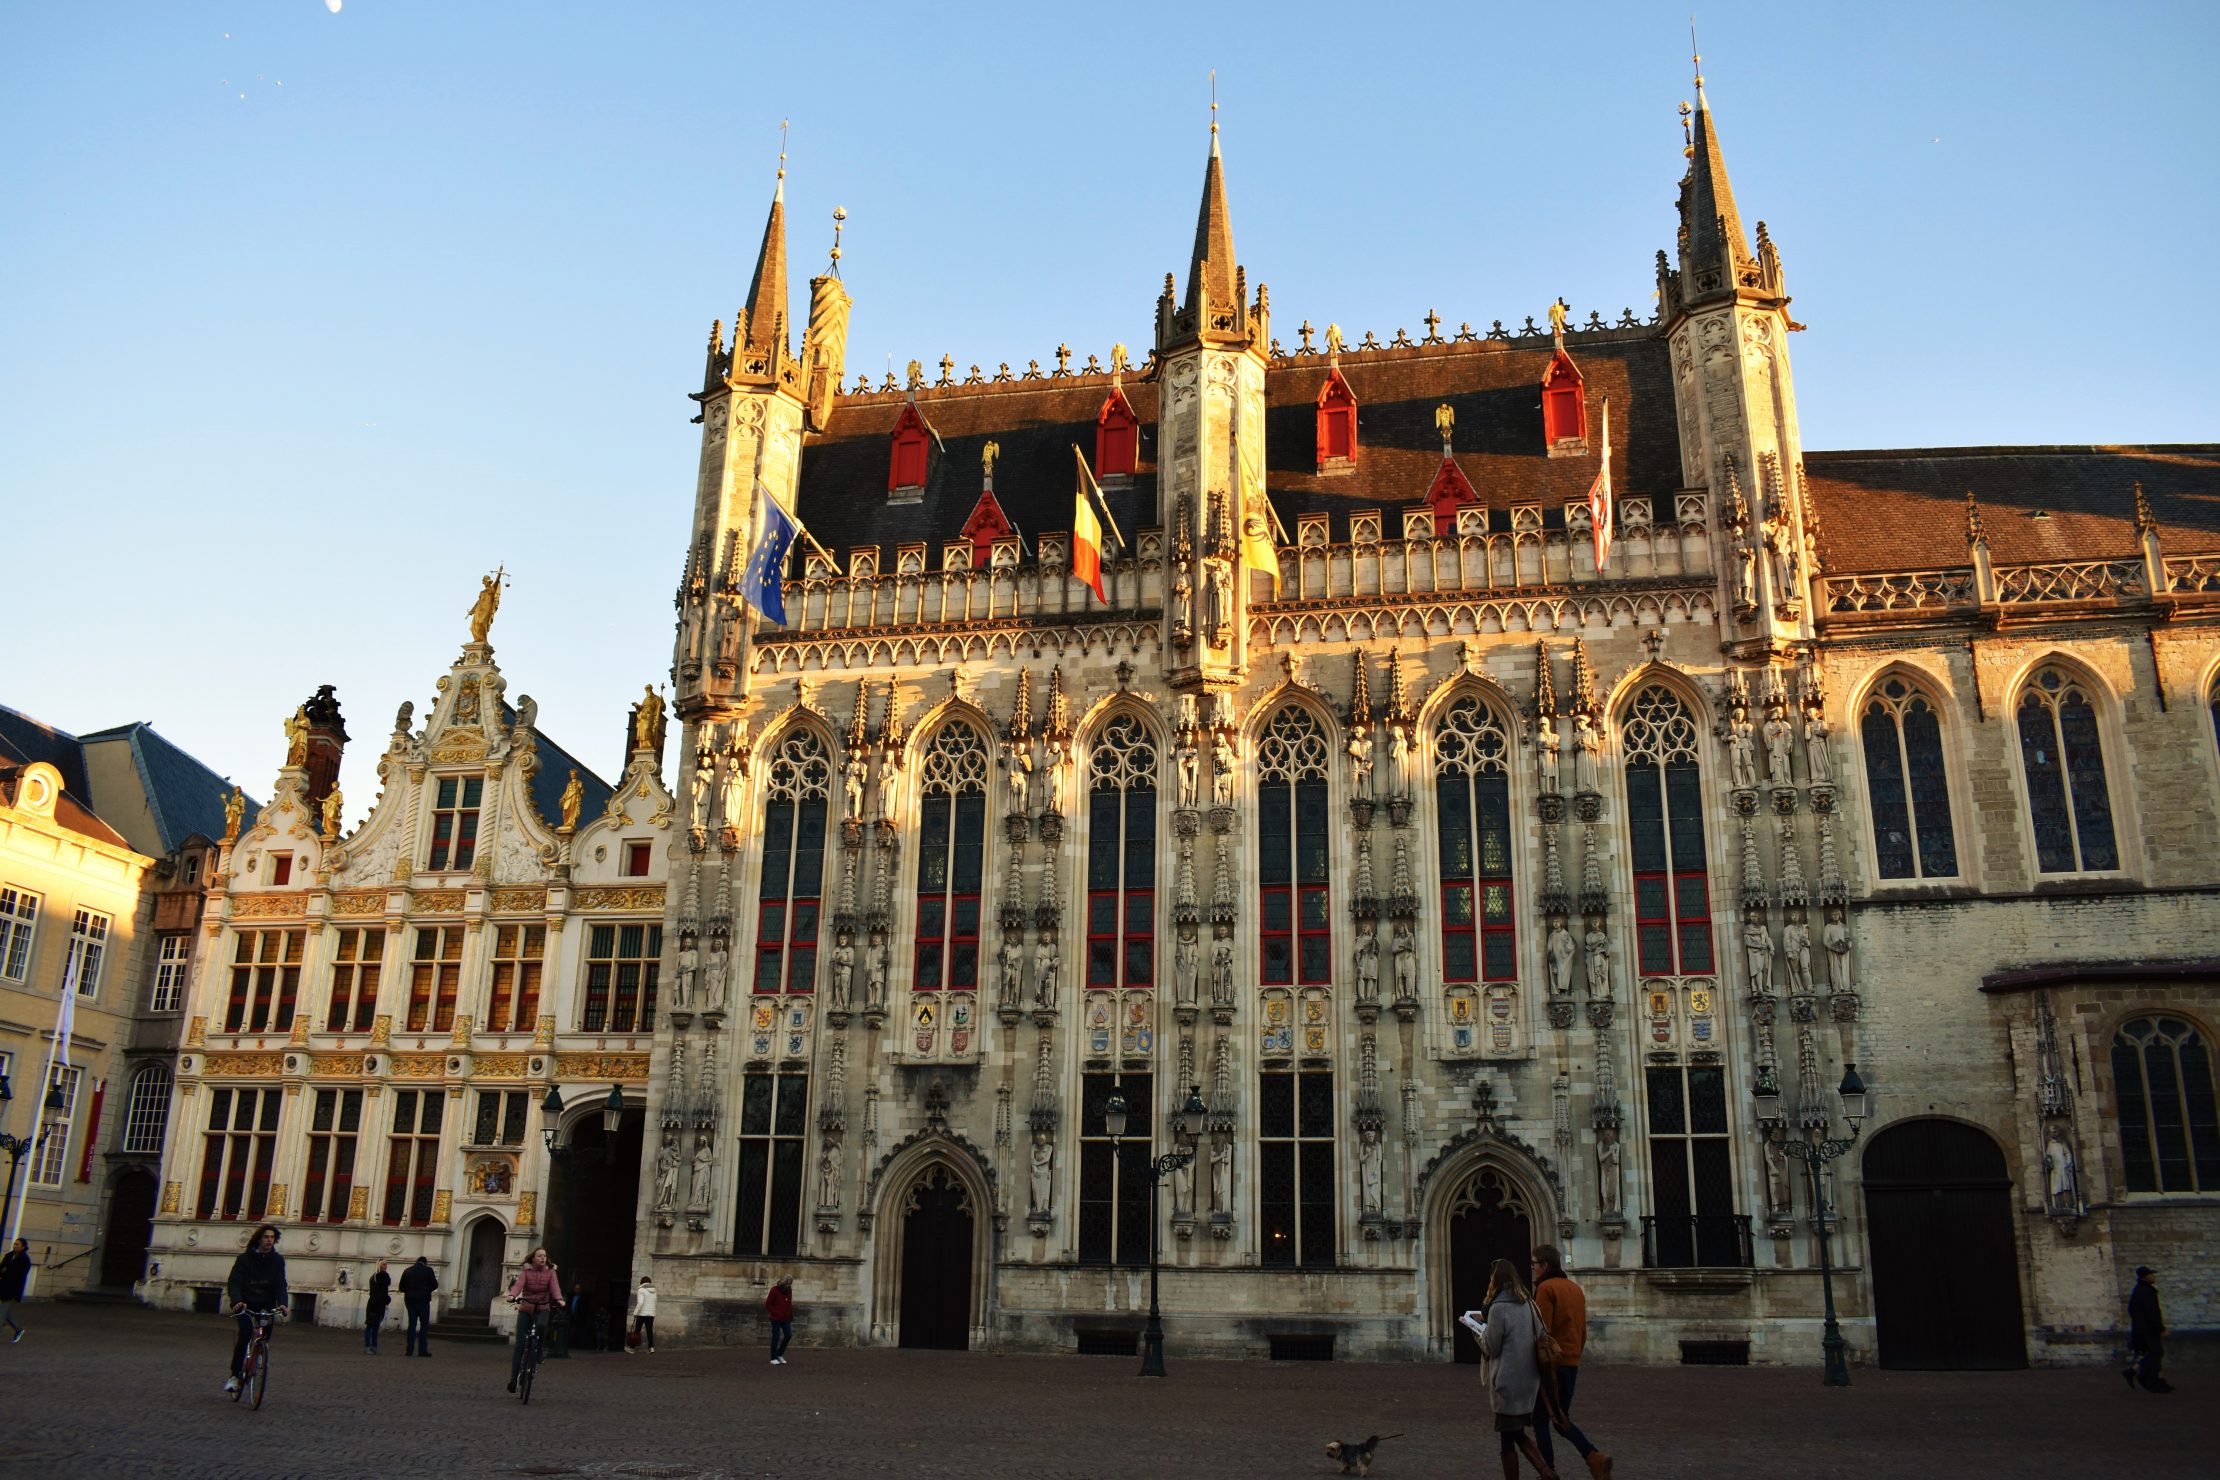 The Palace of the Liberty and City Hall of Bruges by the Burg square